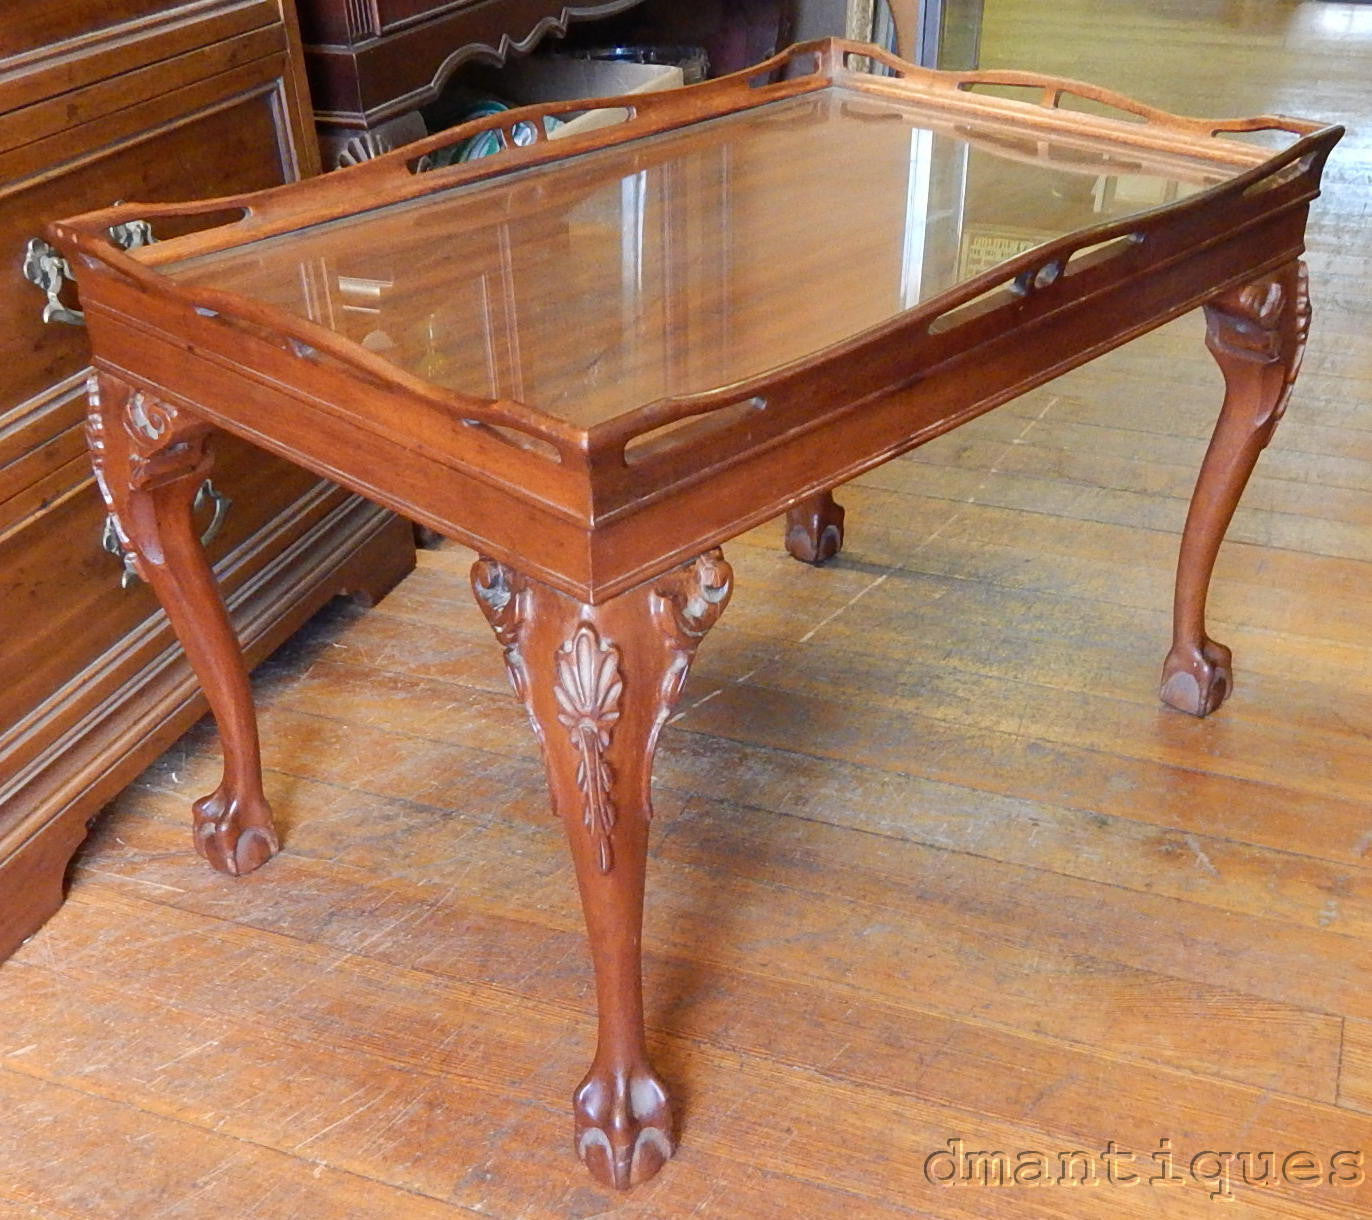 Antique Solid Mahogany Tea Coffee Table with Carved Floral Design and Ball & Claw Foot, and Glass Top Tray.